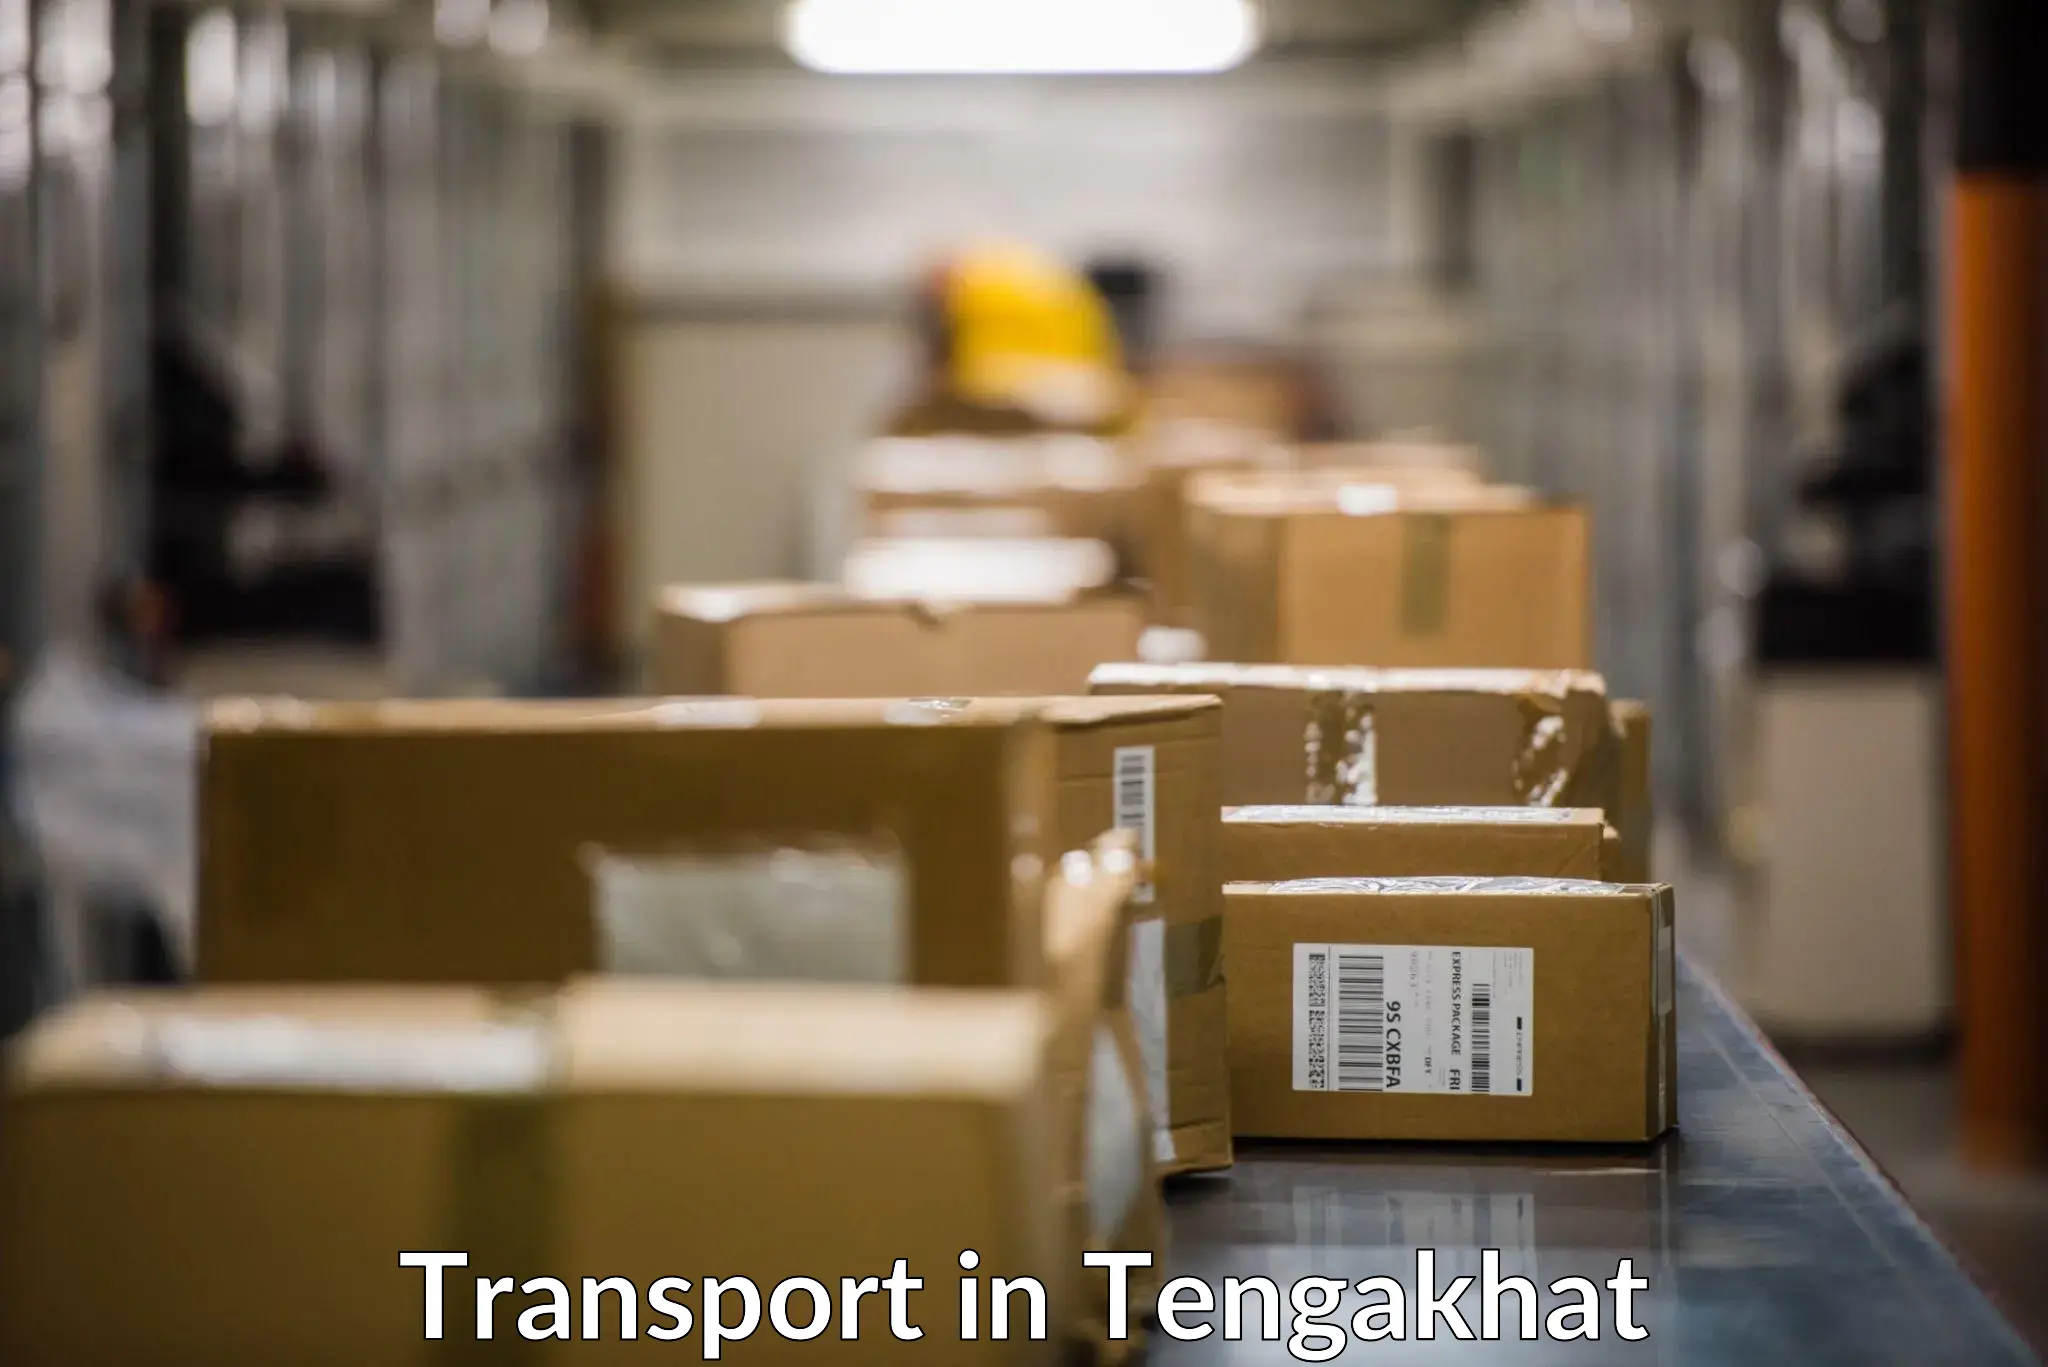 Cargo transportation services in Tengakhat